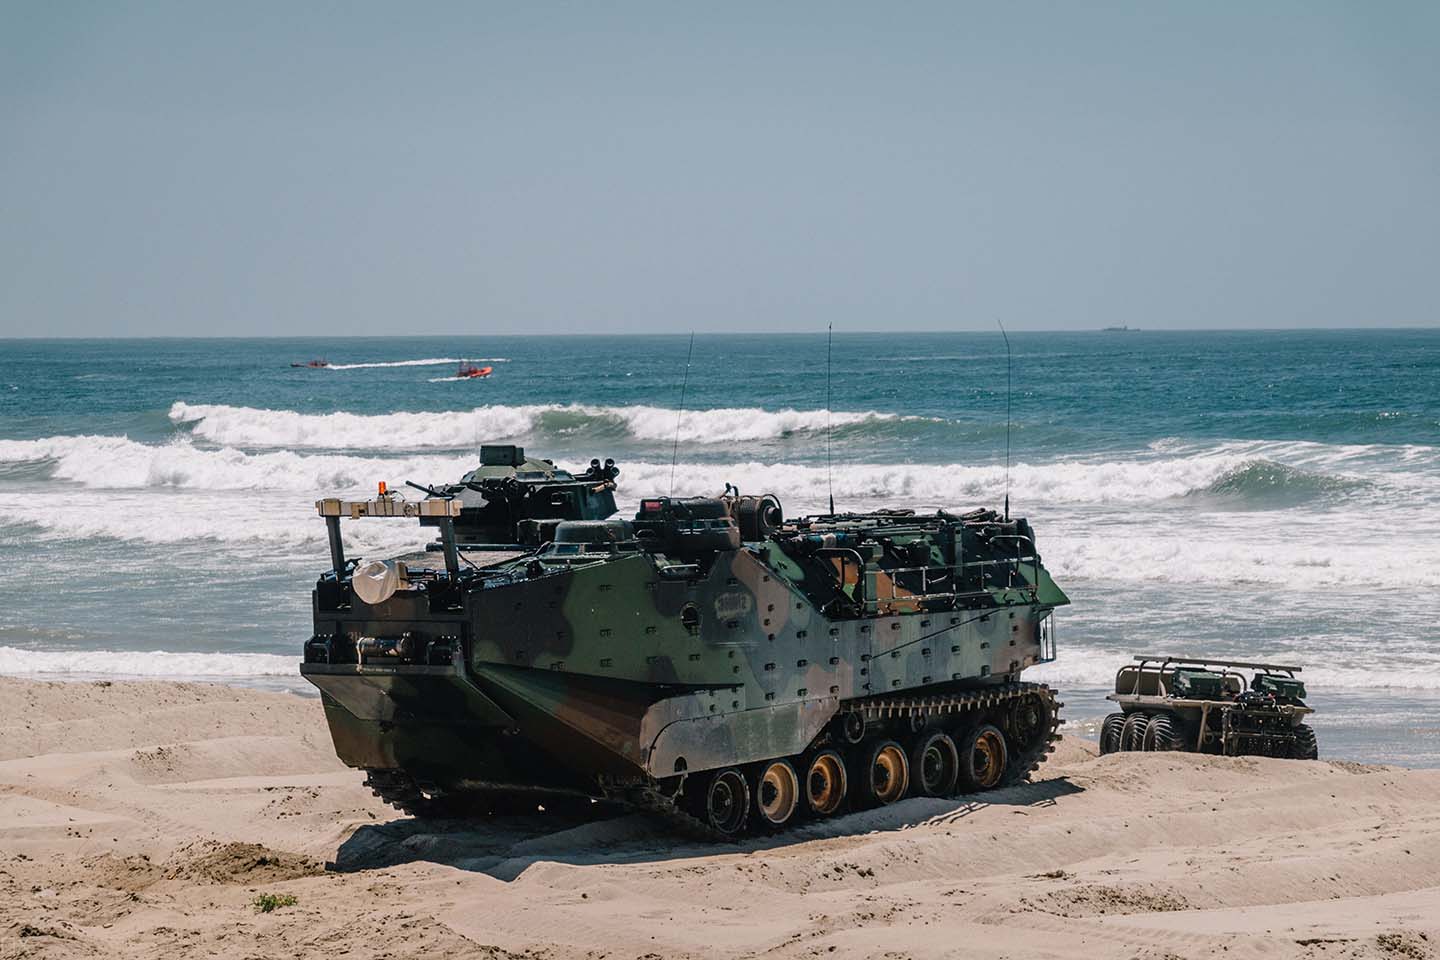 During the exercise, APL’s SUSVs were called upon to provide flank security for USMC amphibious assault forces